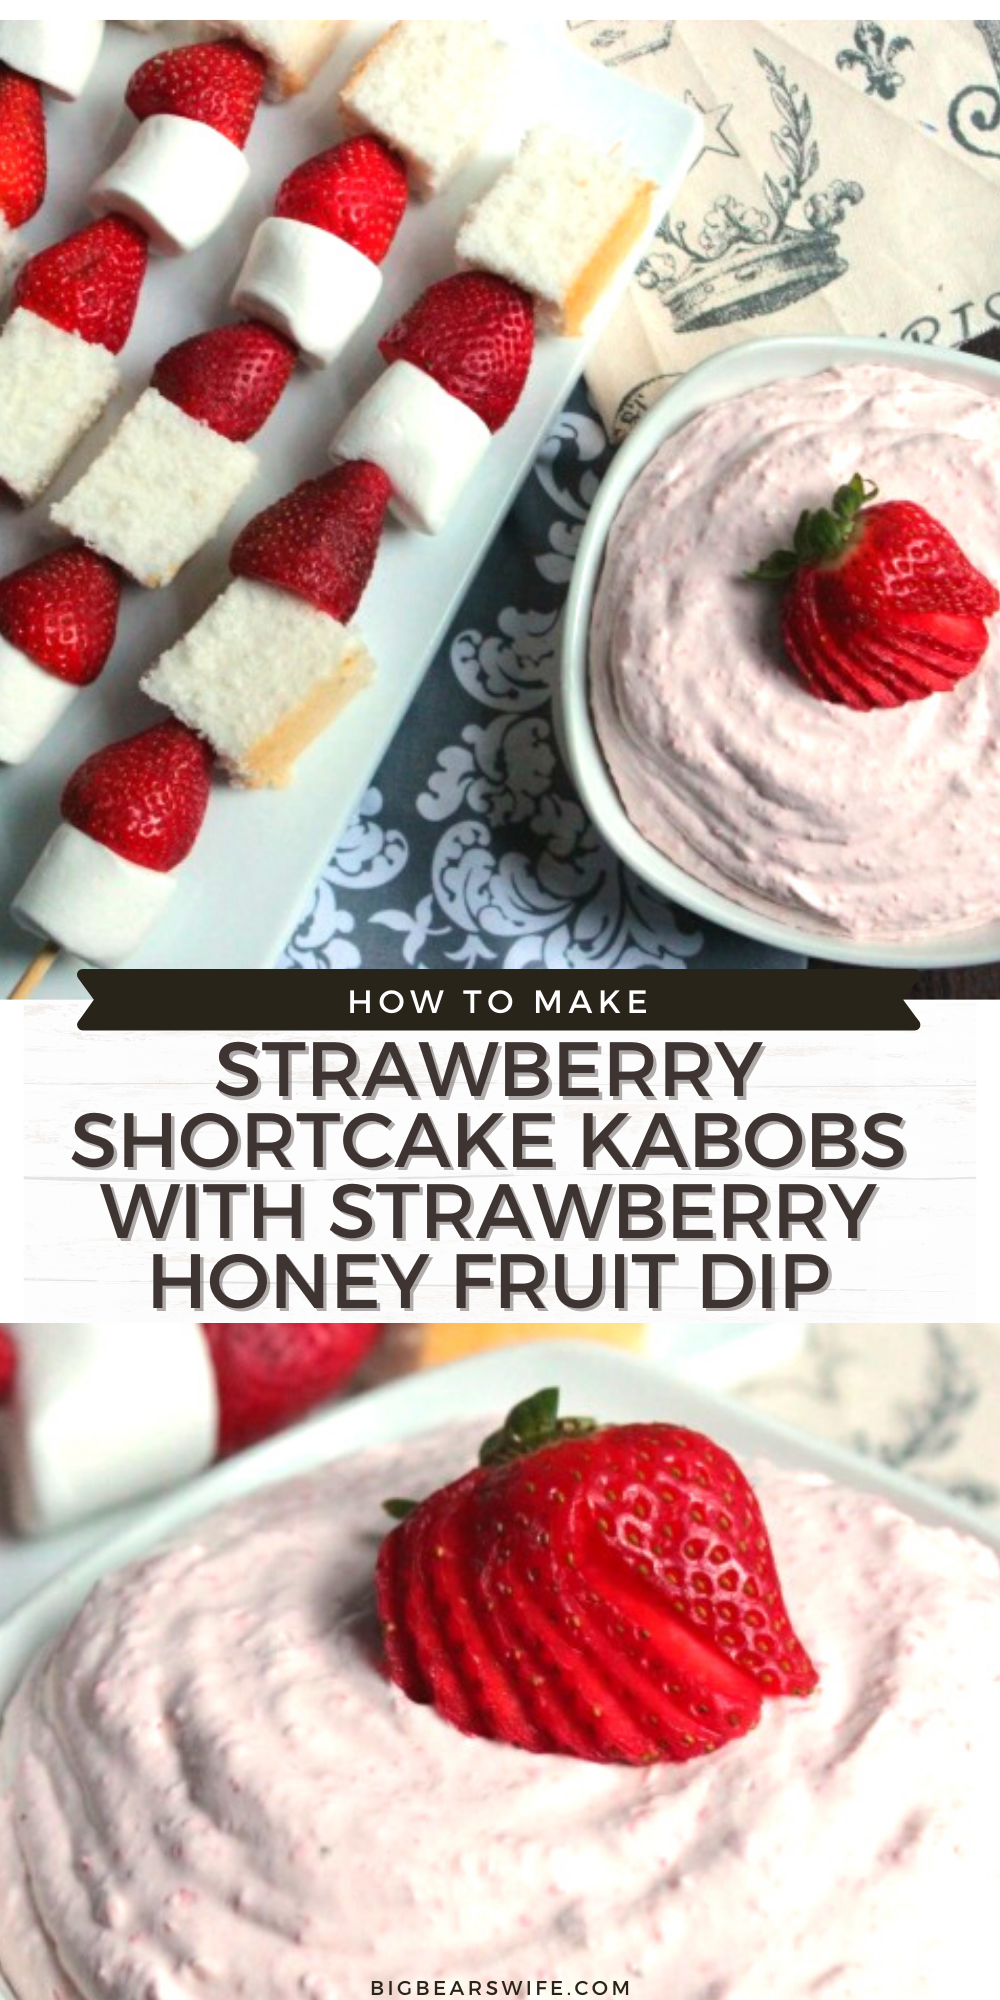 Love Strawberry ShortCake? You're going to love these Strawberry ShortCake Kabobs and Strawberry Honey Fruit Dip! Such an fun dessert for kids and adults! via @bigbearswife